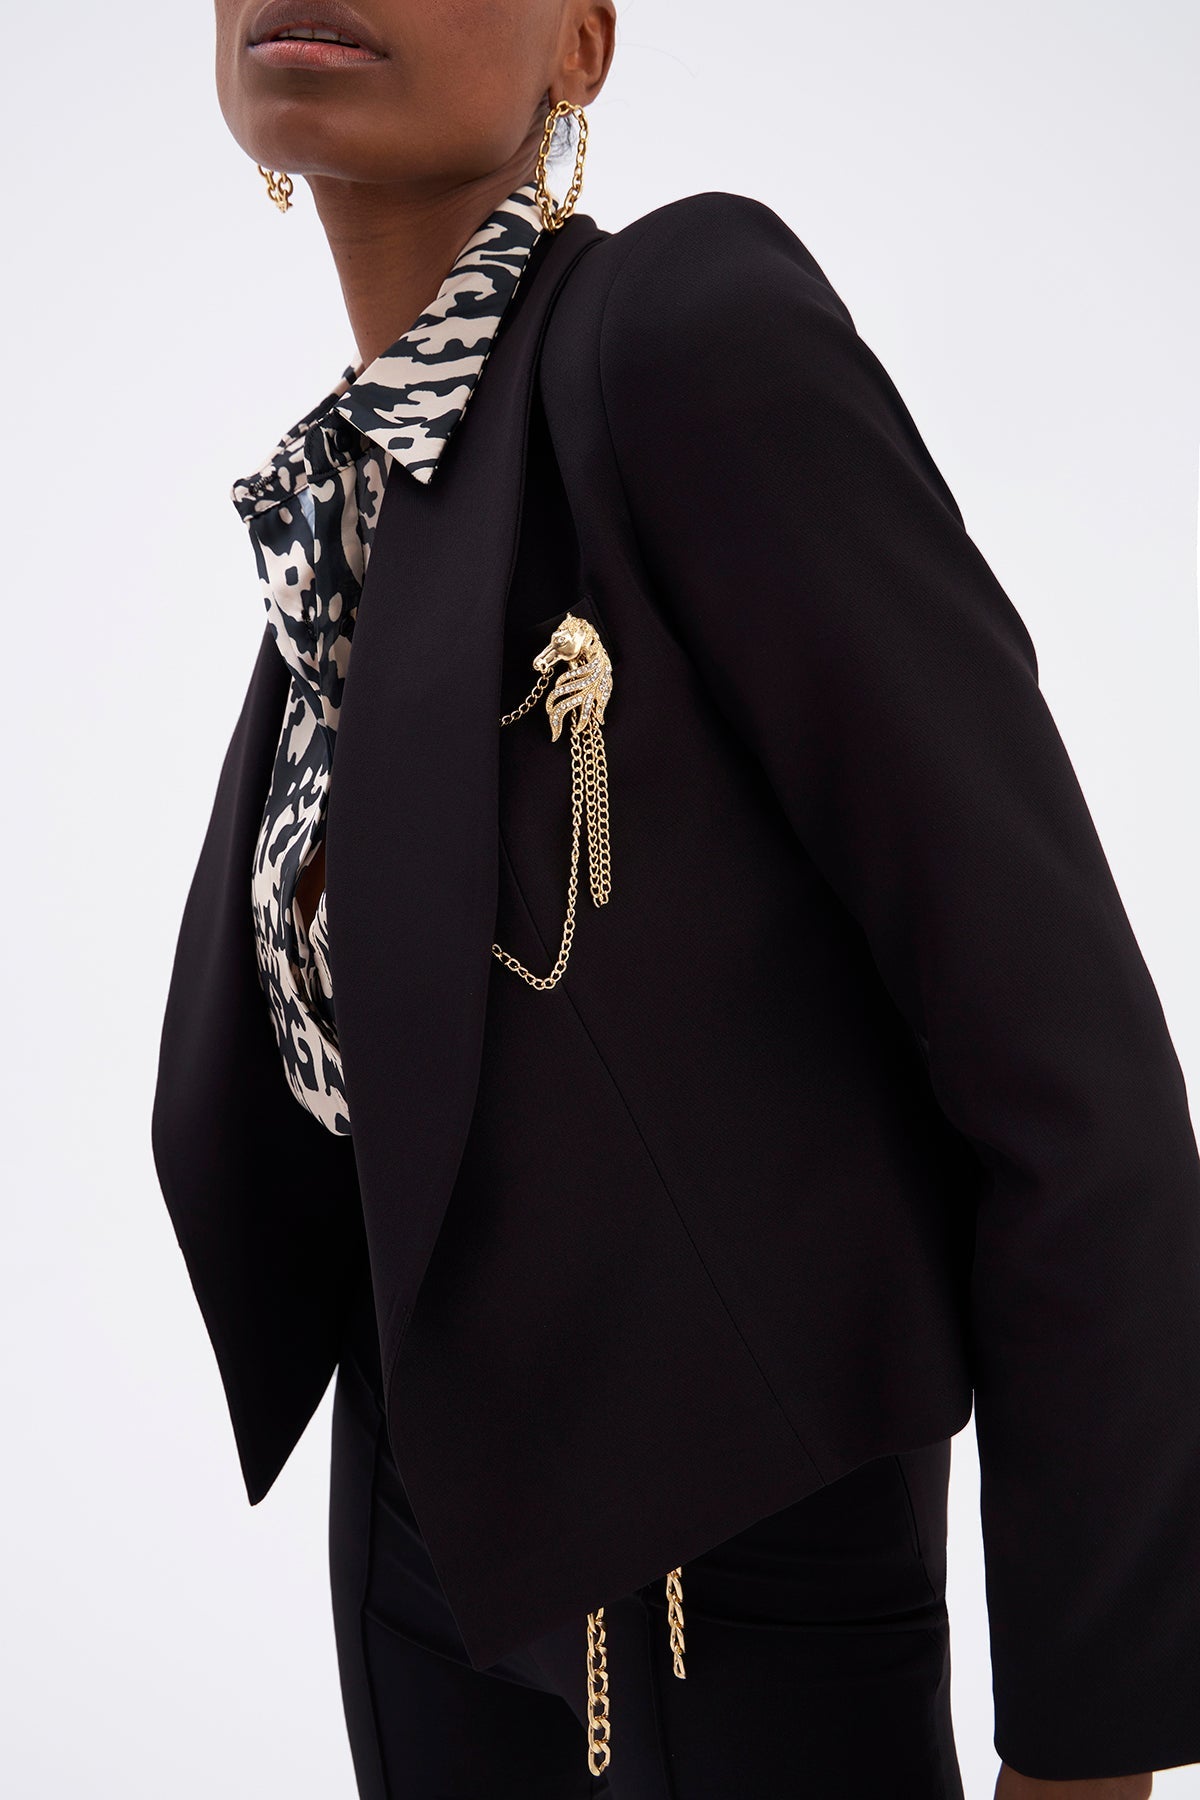 Brooch Detailed Short Jacket without button - BLACK - Jacket - LussoCA